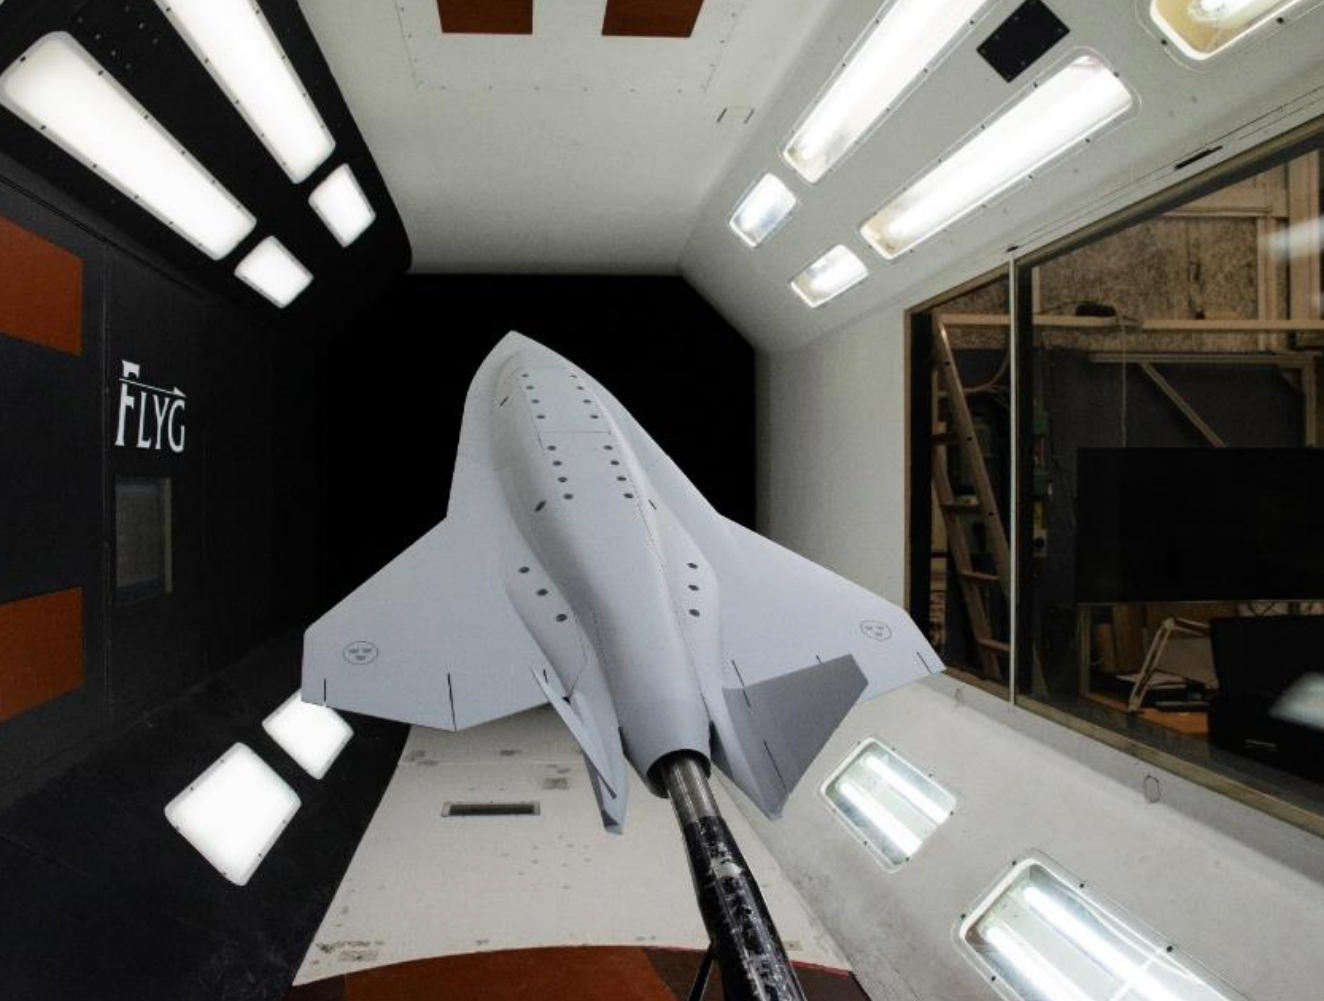 A full view of the Saab Loyal Wingman concept in the L-2000 Wind tunnel at the Royal Technical High School, Stockholm. <em>Saab via X</em>